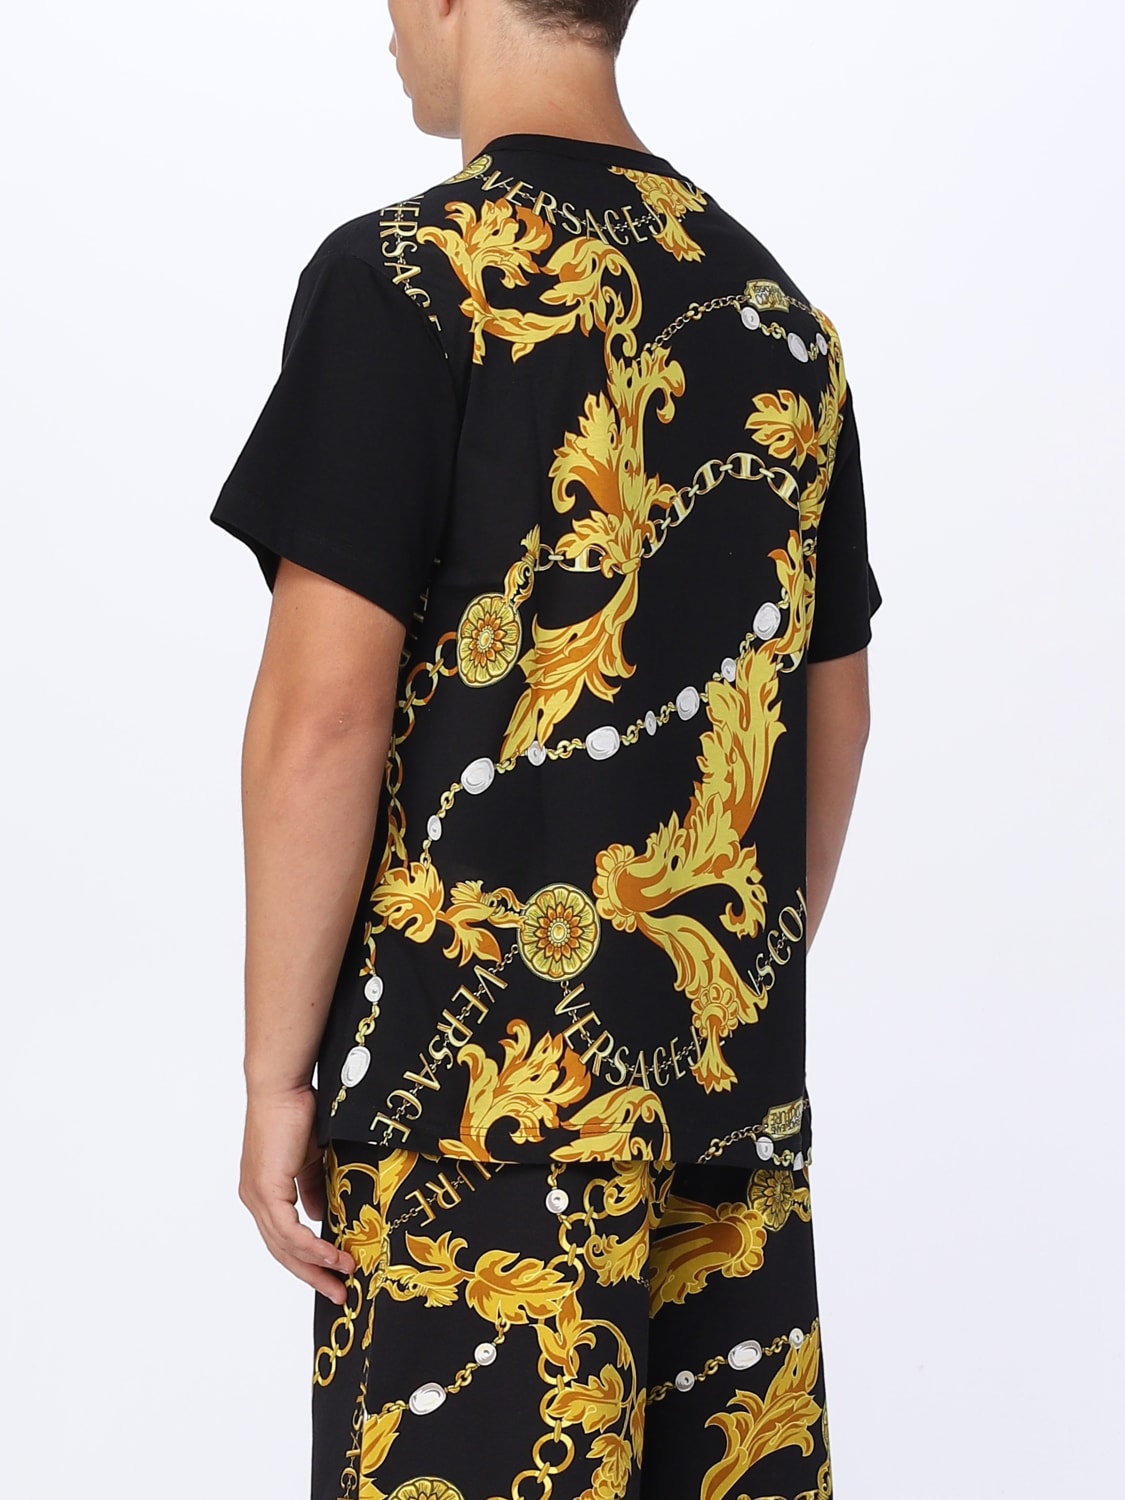 VERSACE JEANS COUTURE：Tシャツ メンズ - ブラック | GIGLIO.COM ...